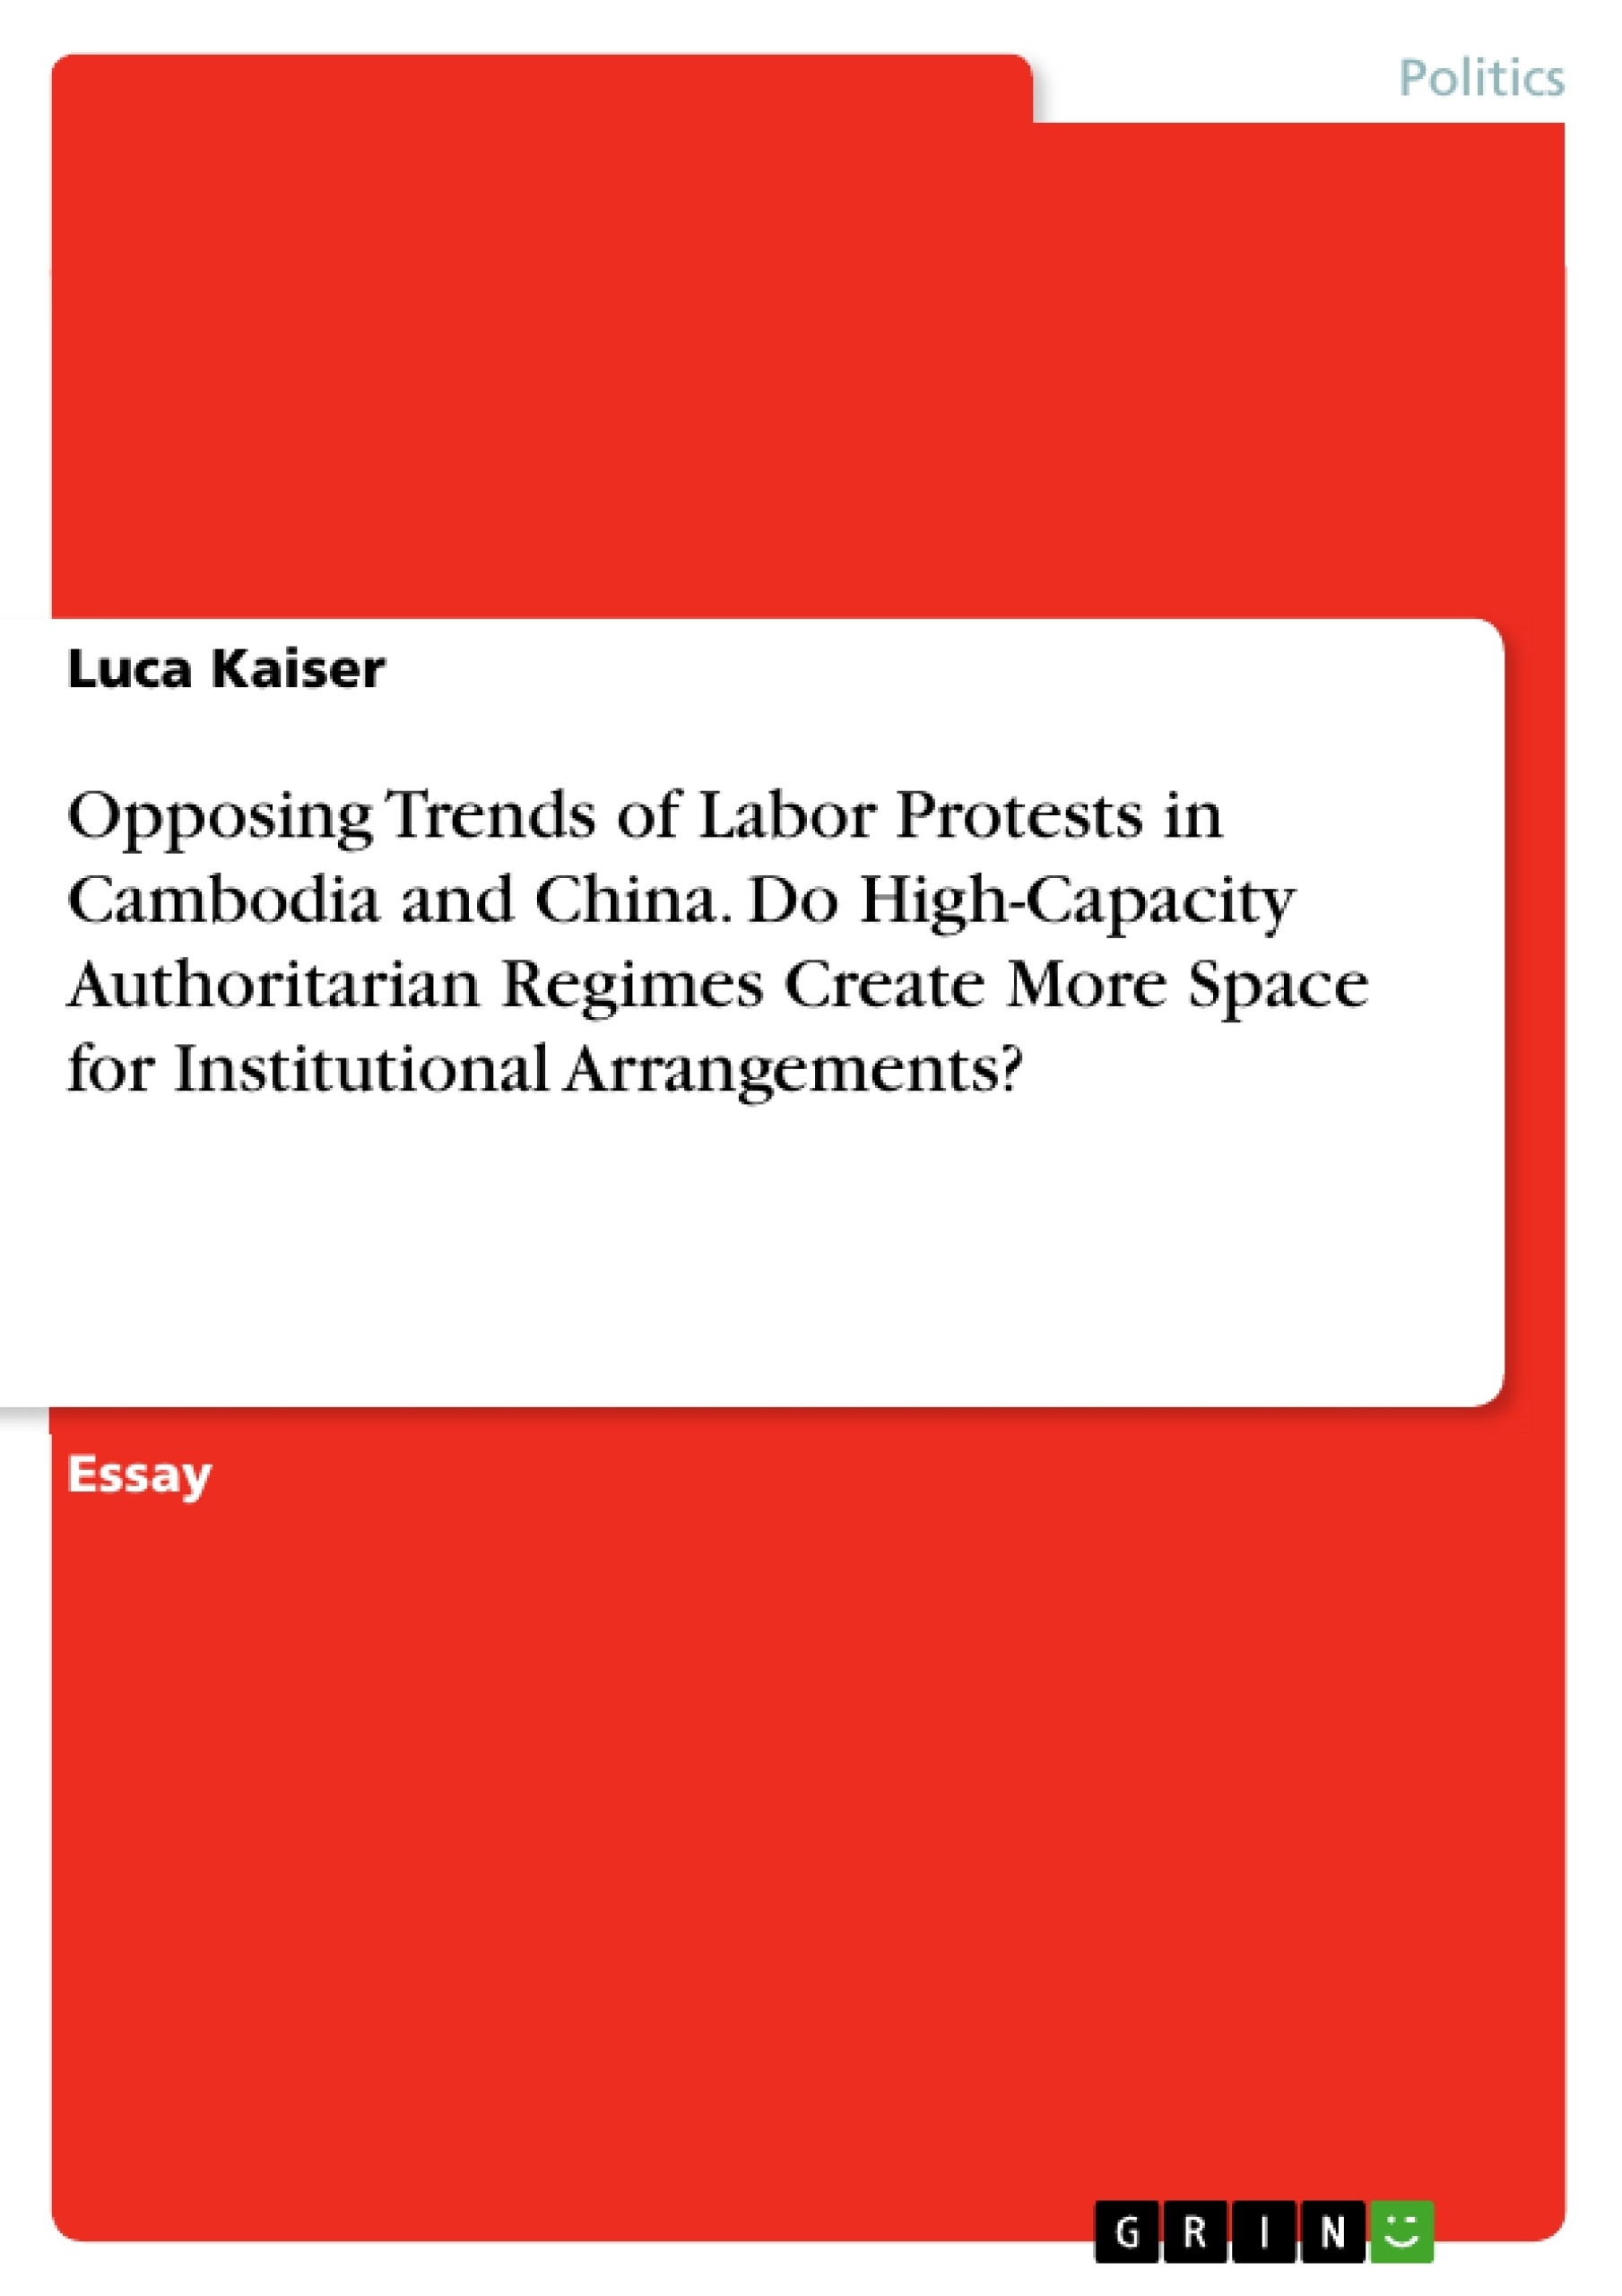 Title: Opposing Trends of Labor Protests in Cambodia and China. Do High-Capacity Authoritarian Regimes Create More Space for Institutional Arrangements?